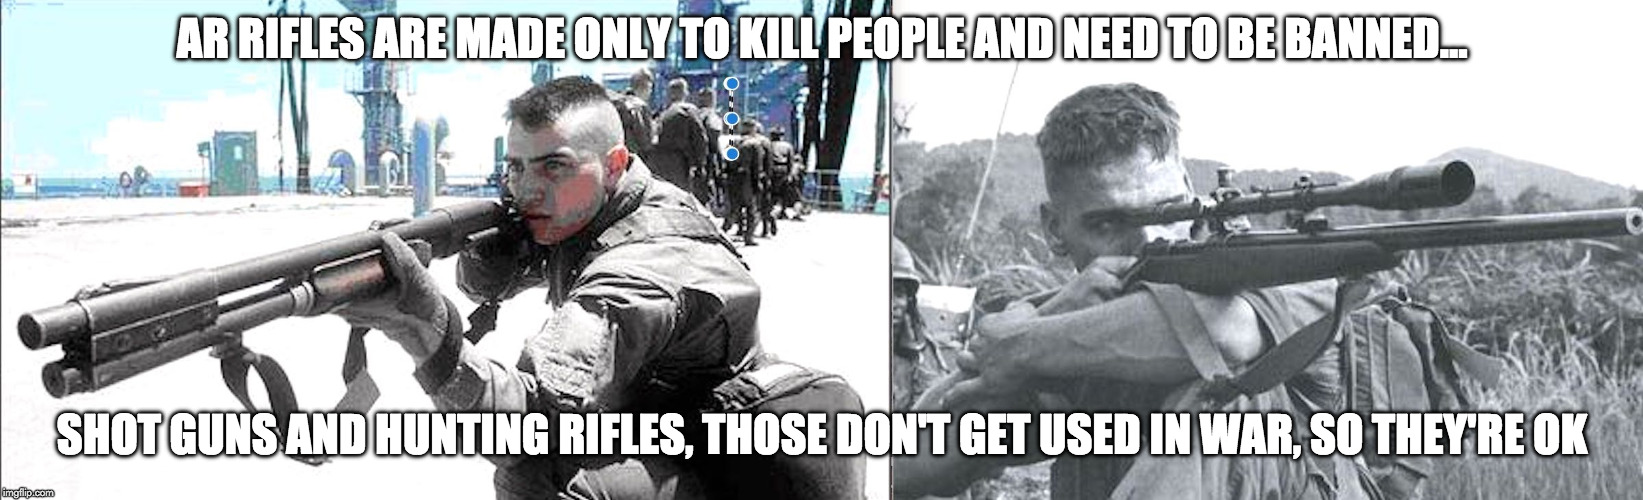 AR rifles for plebs | AR RIFLES ARE MADE ONLY TO KILL PEOPLE AND NEED TO BE BANNED... SHOT GUNS AND HUNTING RIFLES, THOSE DON'T GET USED IN WAR, SO THEY'RE OK | image tagged in guns | made w/ Imgflip meme maker